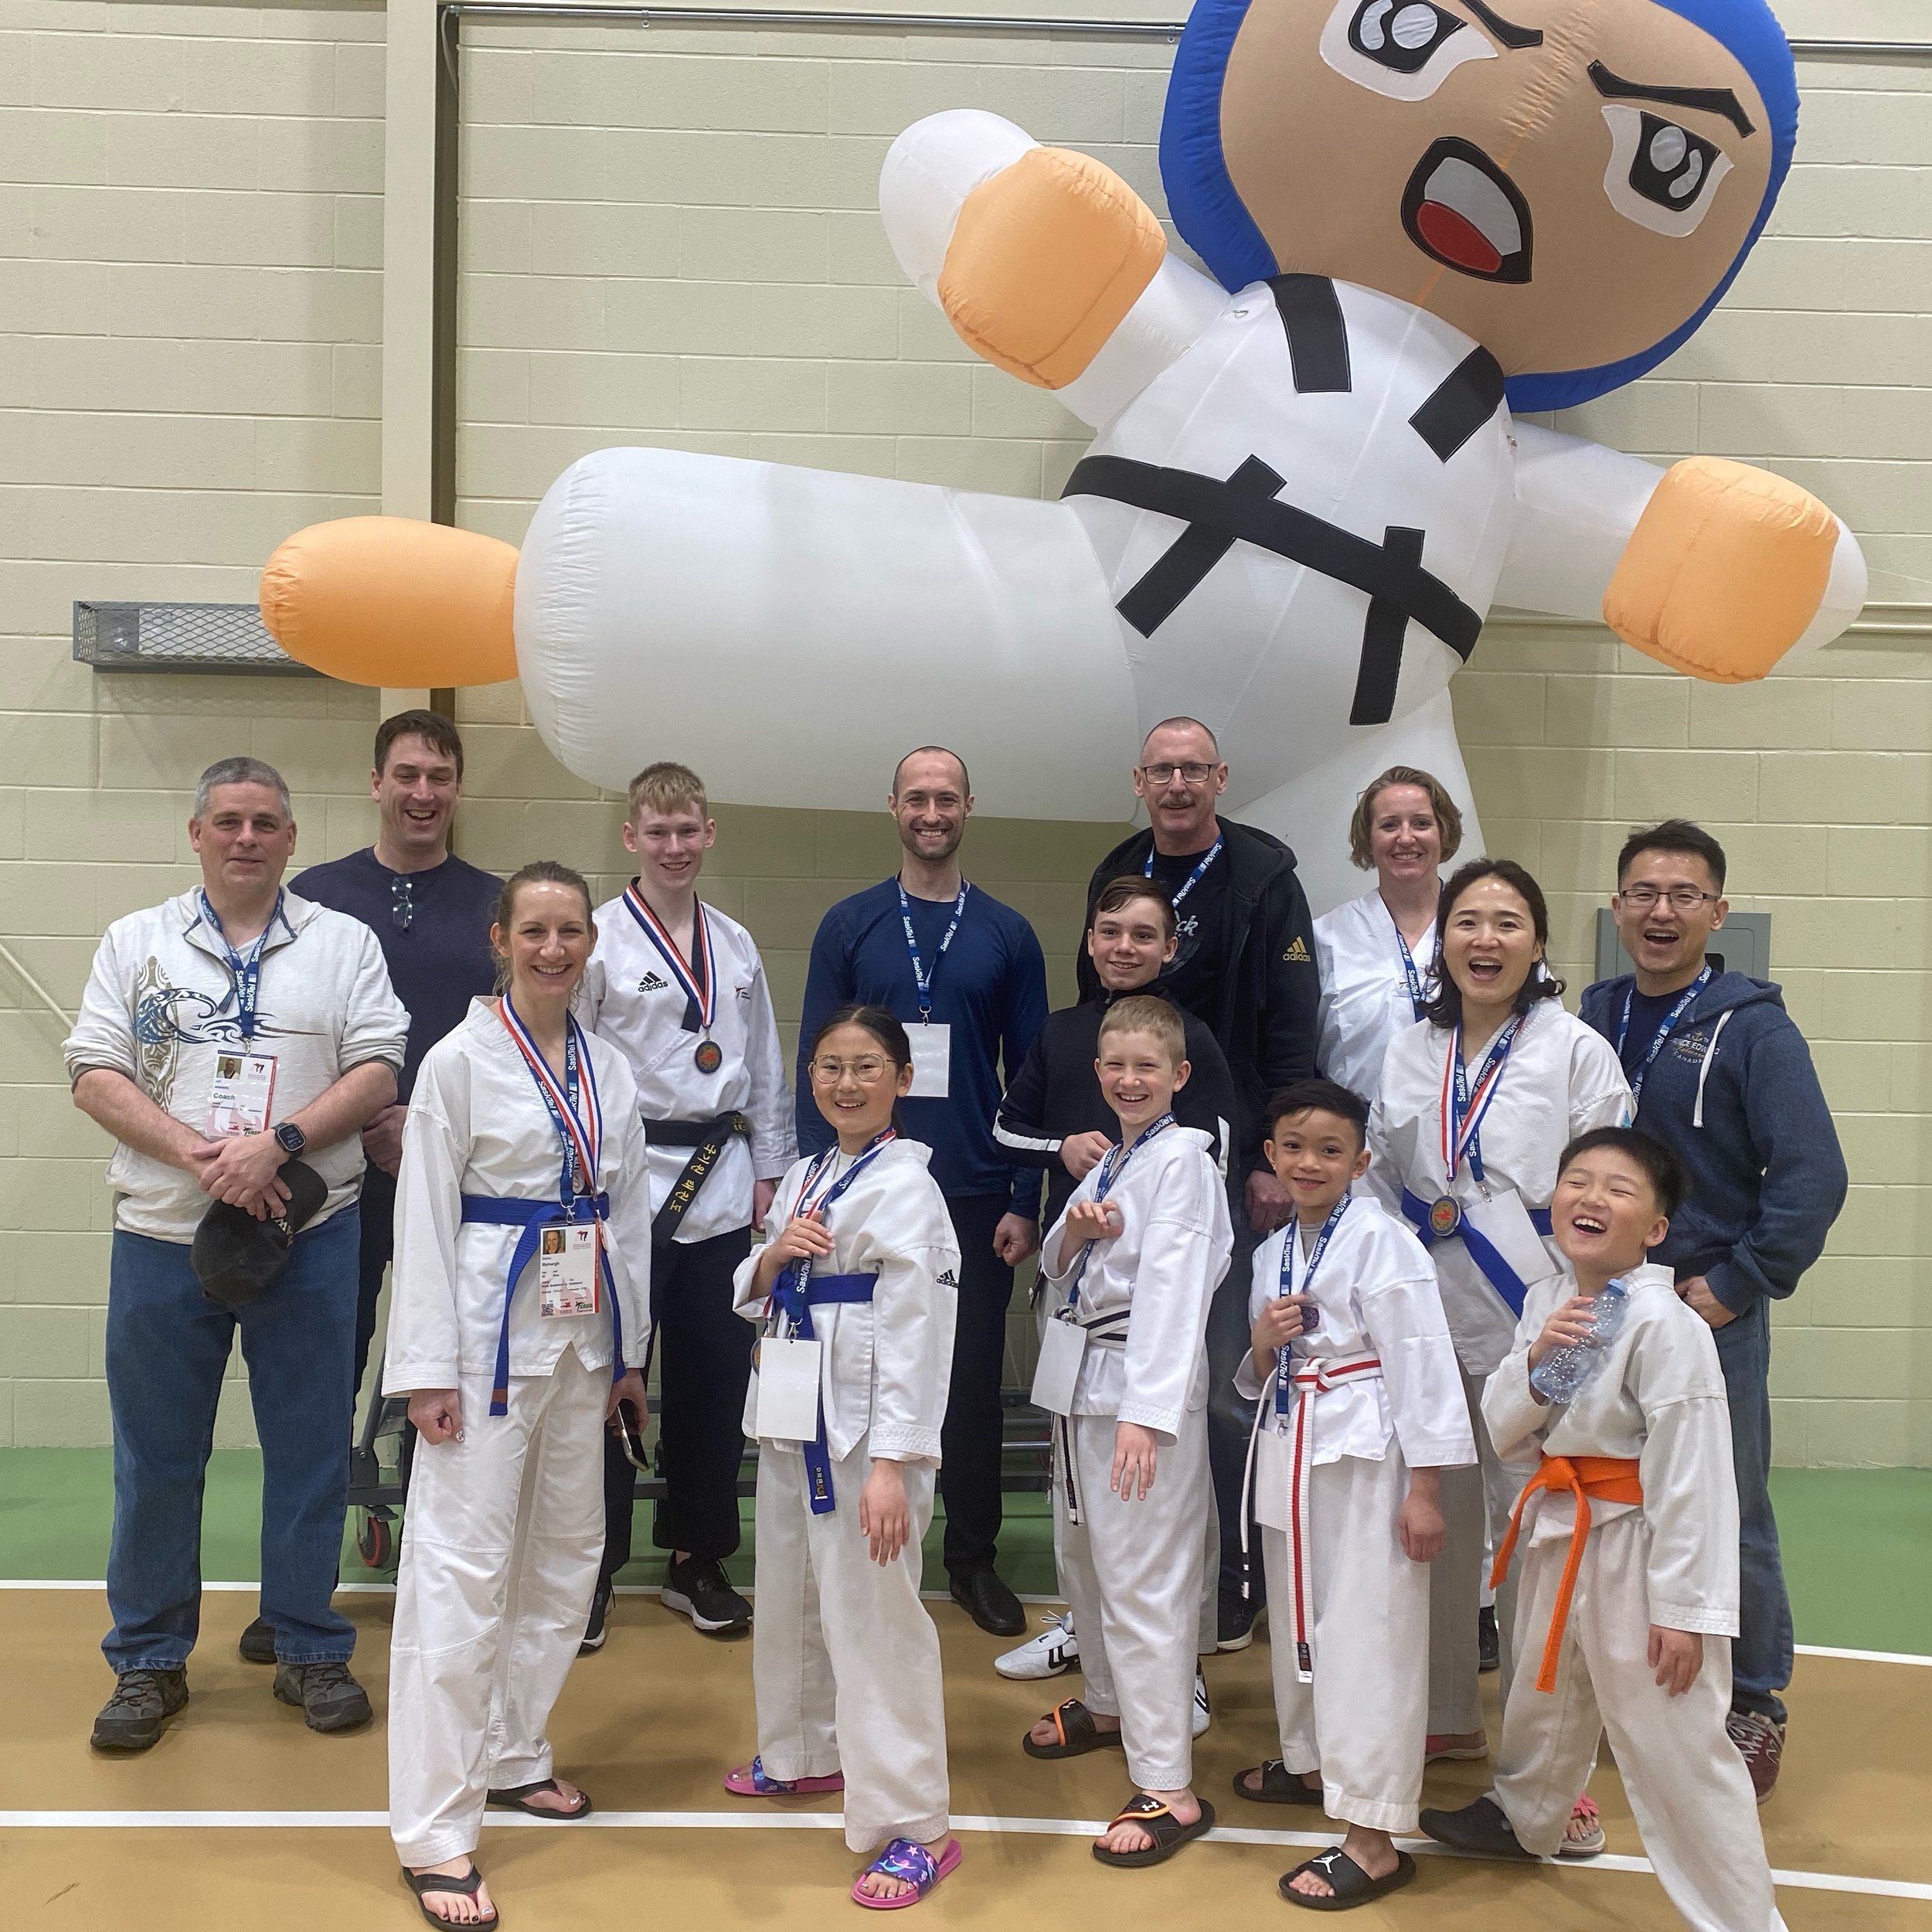 NBTKDA&rsquo;s team of competitors and coaches at the 26th Annual Prairie Wildfire Challenge in Yorkton last weekend. 

Thank you to everyone who, as always, represented the dojang with strength, cooperation and sportsmanship!

🥇: 8
🥈: 4
🥉: 1
4th: